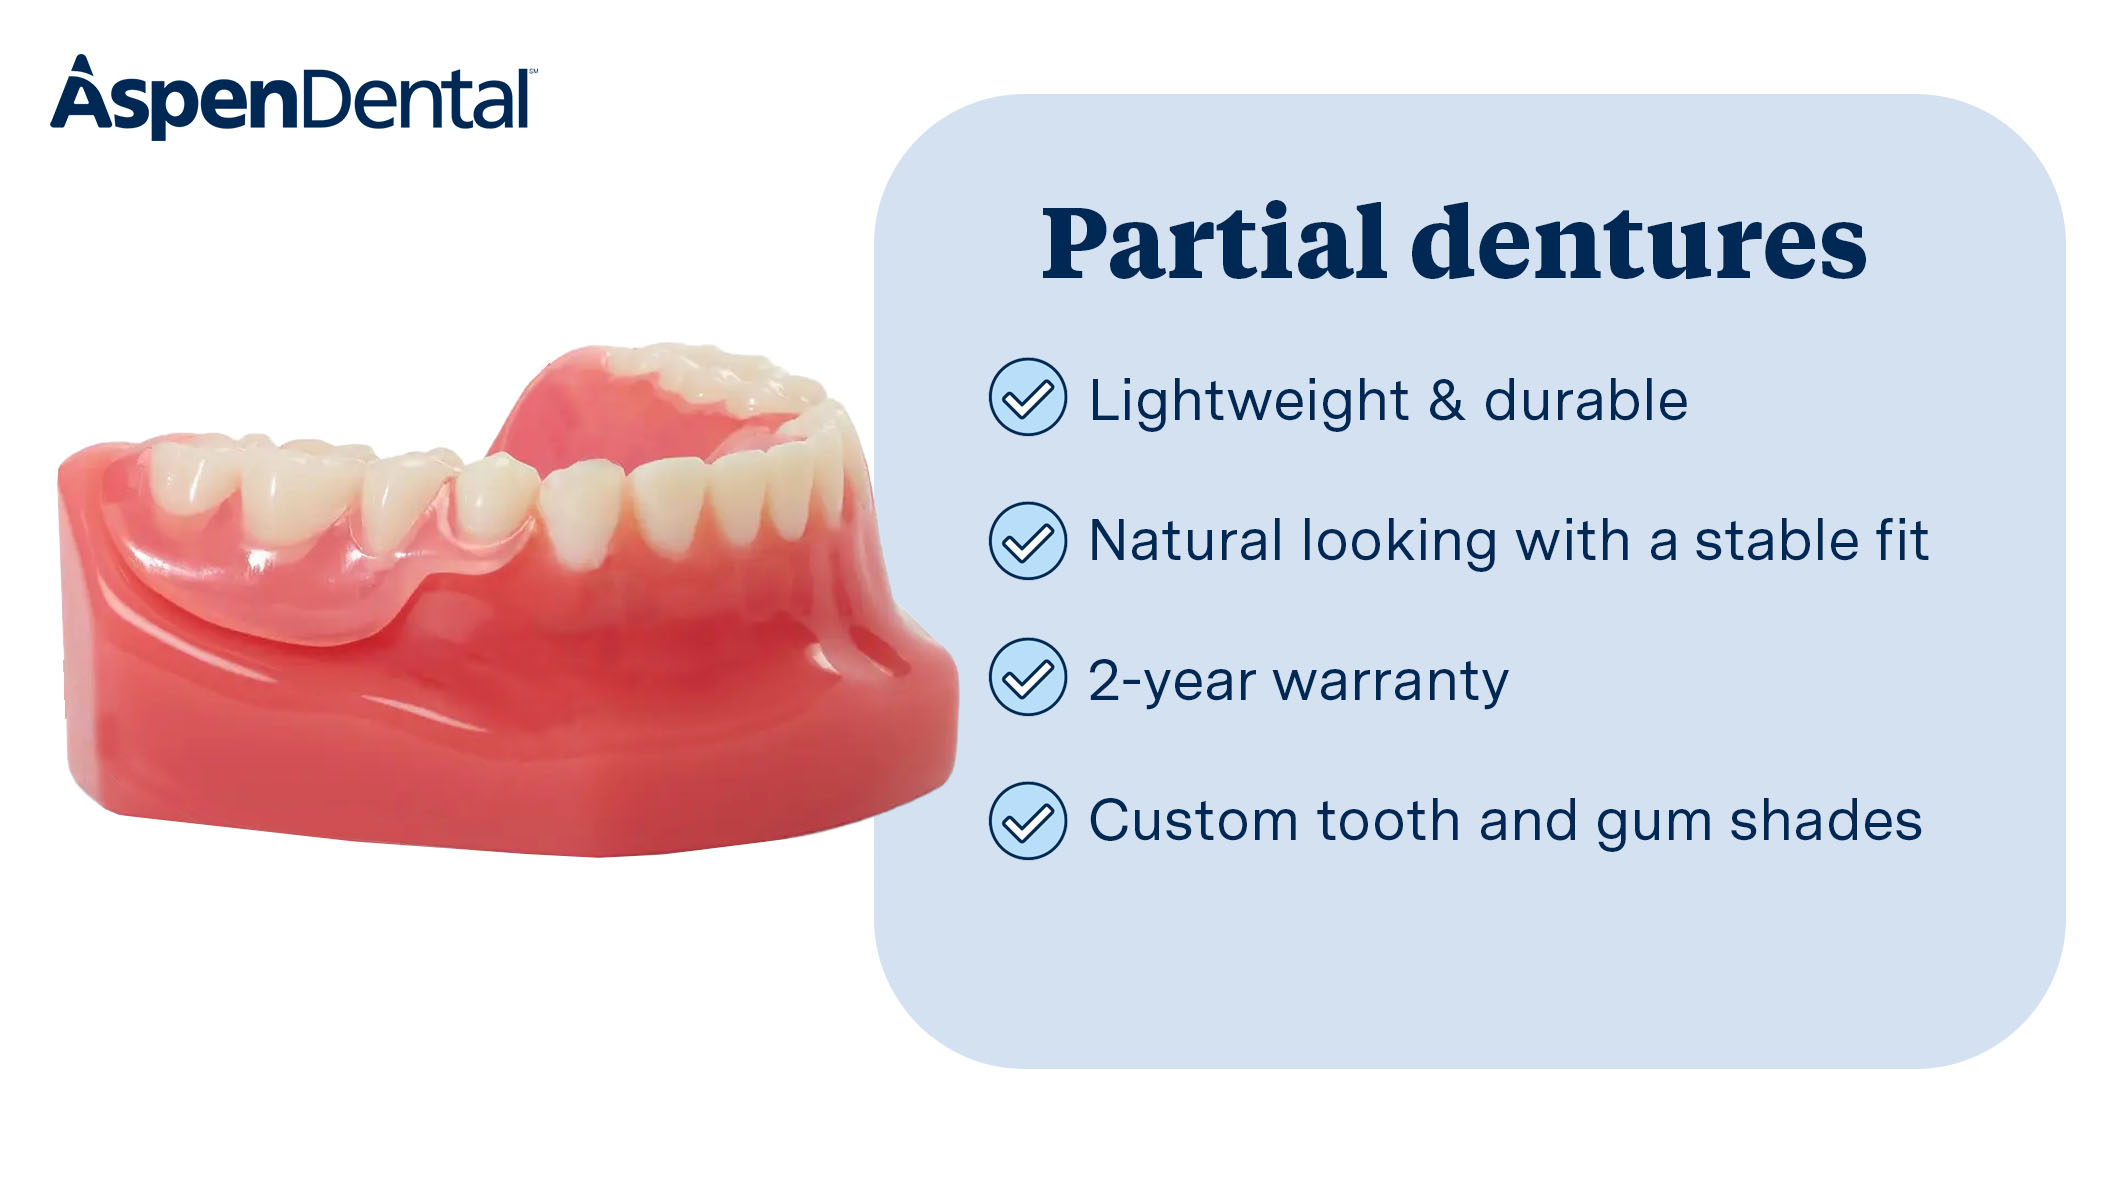 Restore your smile with our customizable partial dentures. Lightweight, durable, natural-looking, an Aspen Dental - Saint Clair, PA Saint Clair (570)260-1331